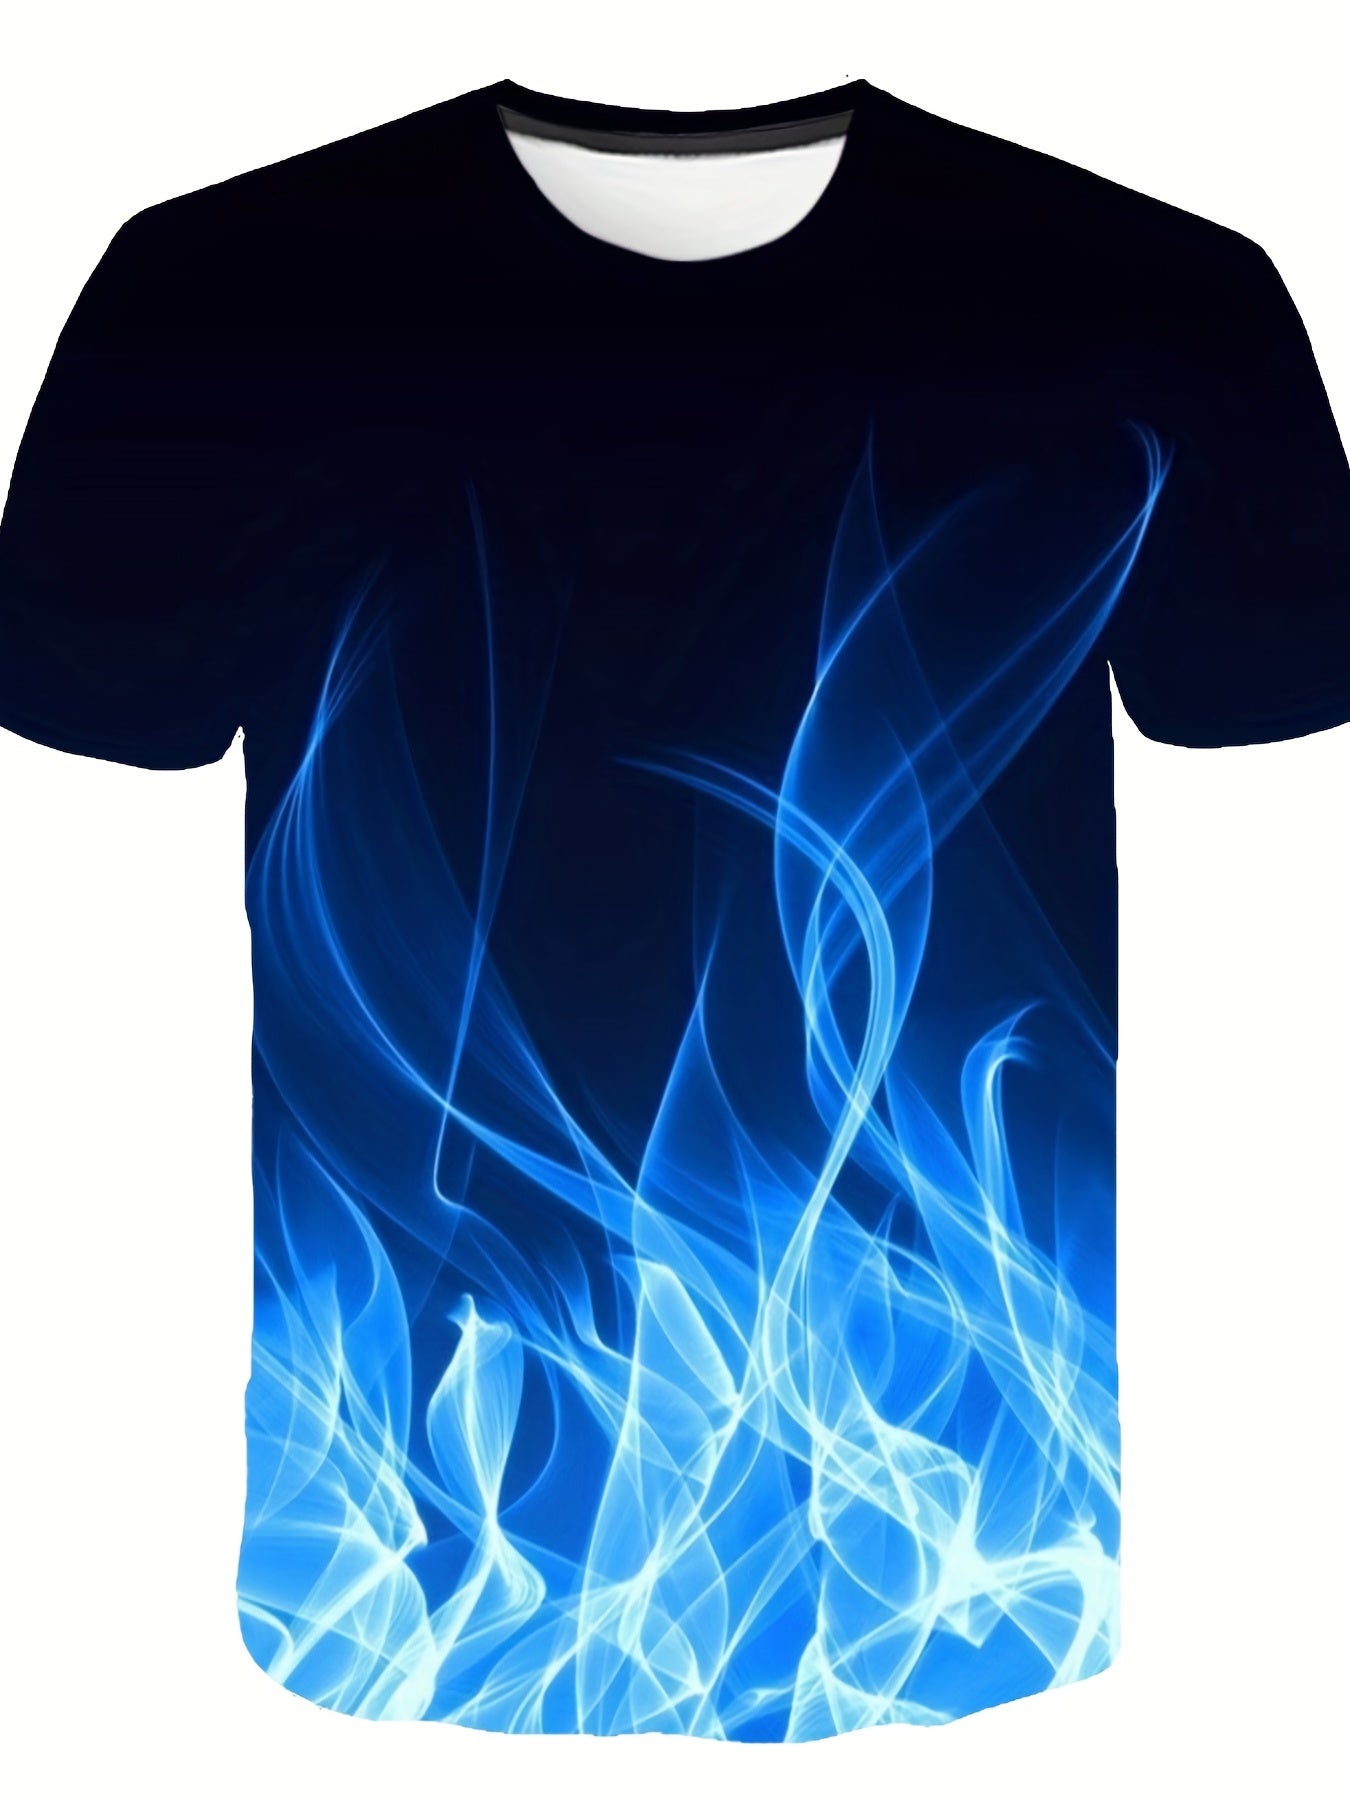 Boys' Blue Flame Graphic T-Shirt - 3D Digital Print, Active & Stretchy Short Sleeve Tee For Summer Outdoor Fun